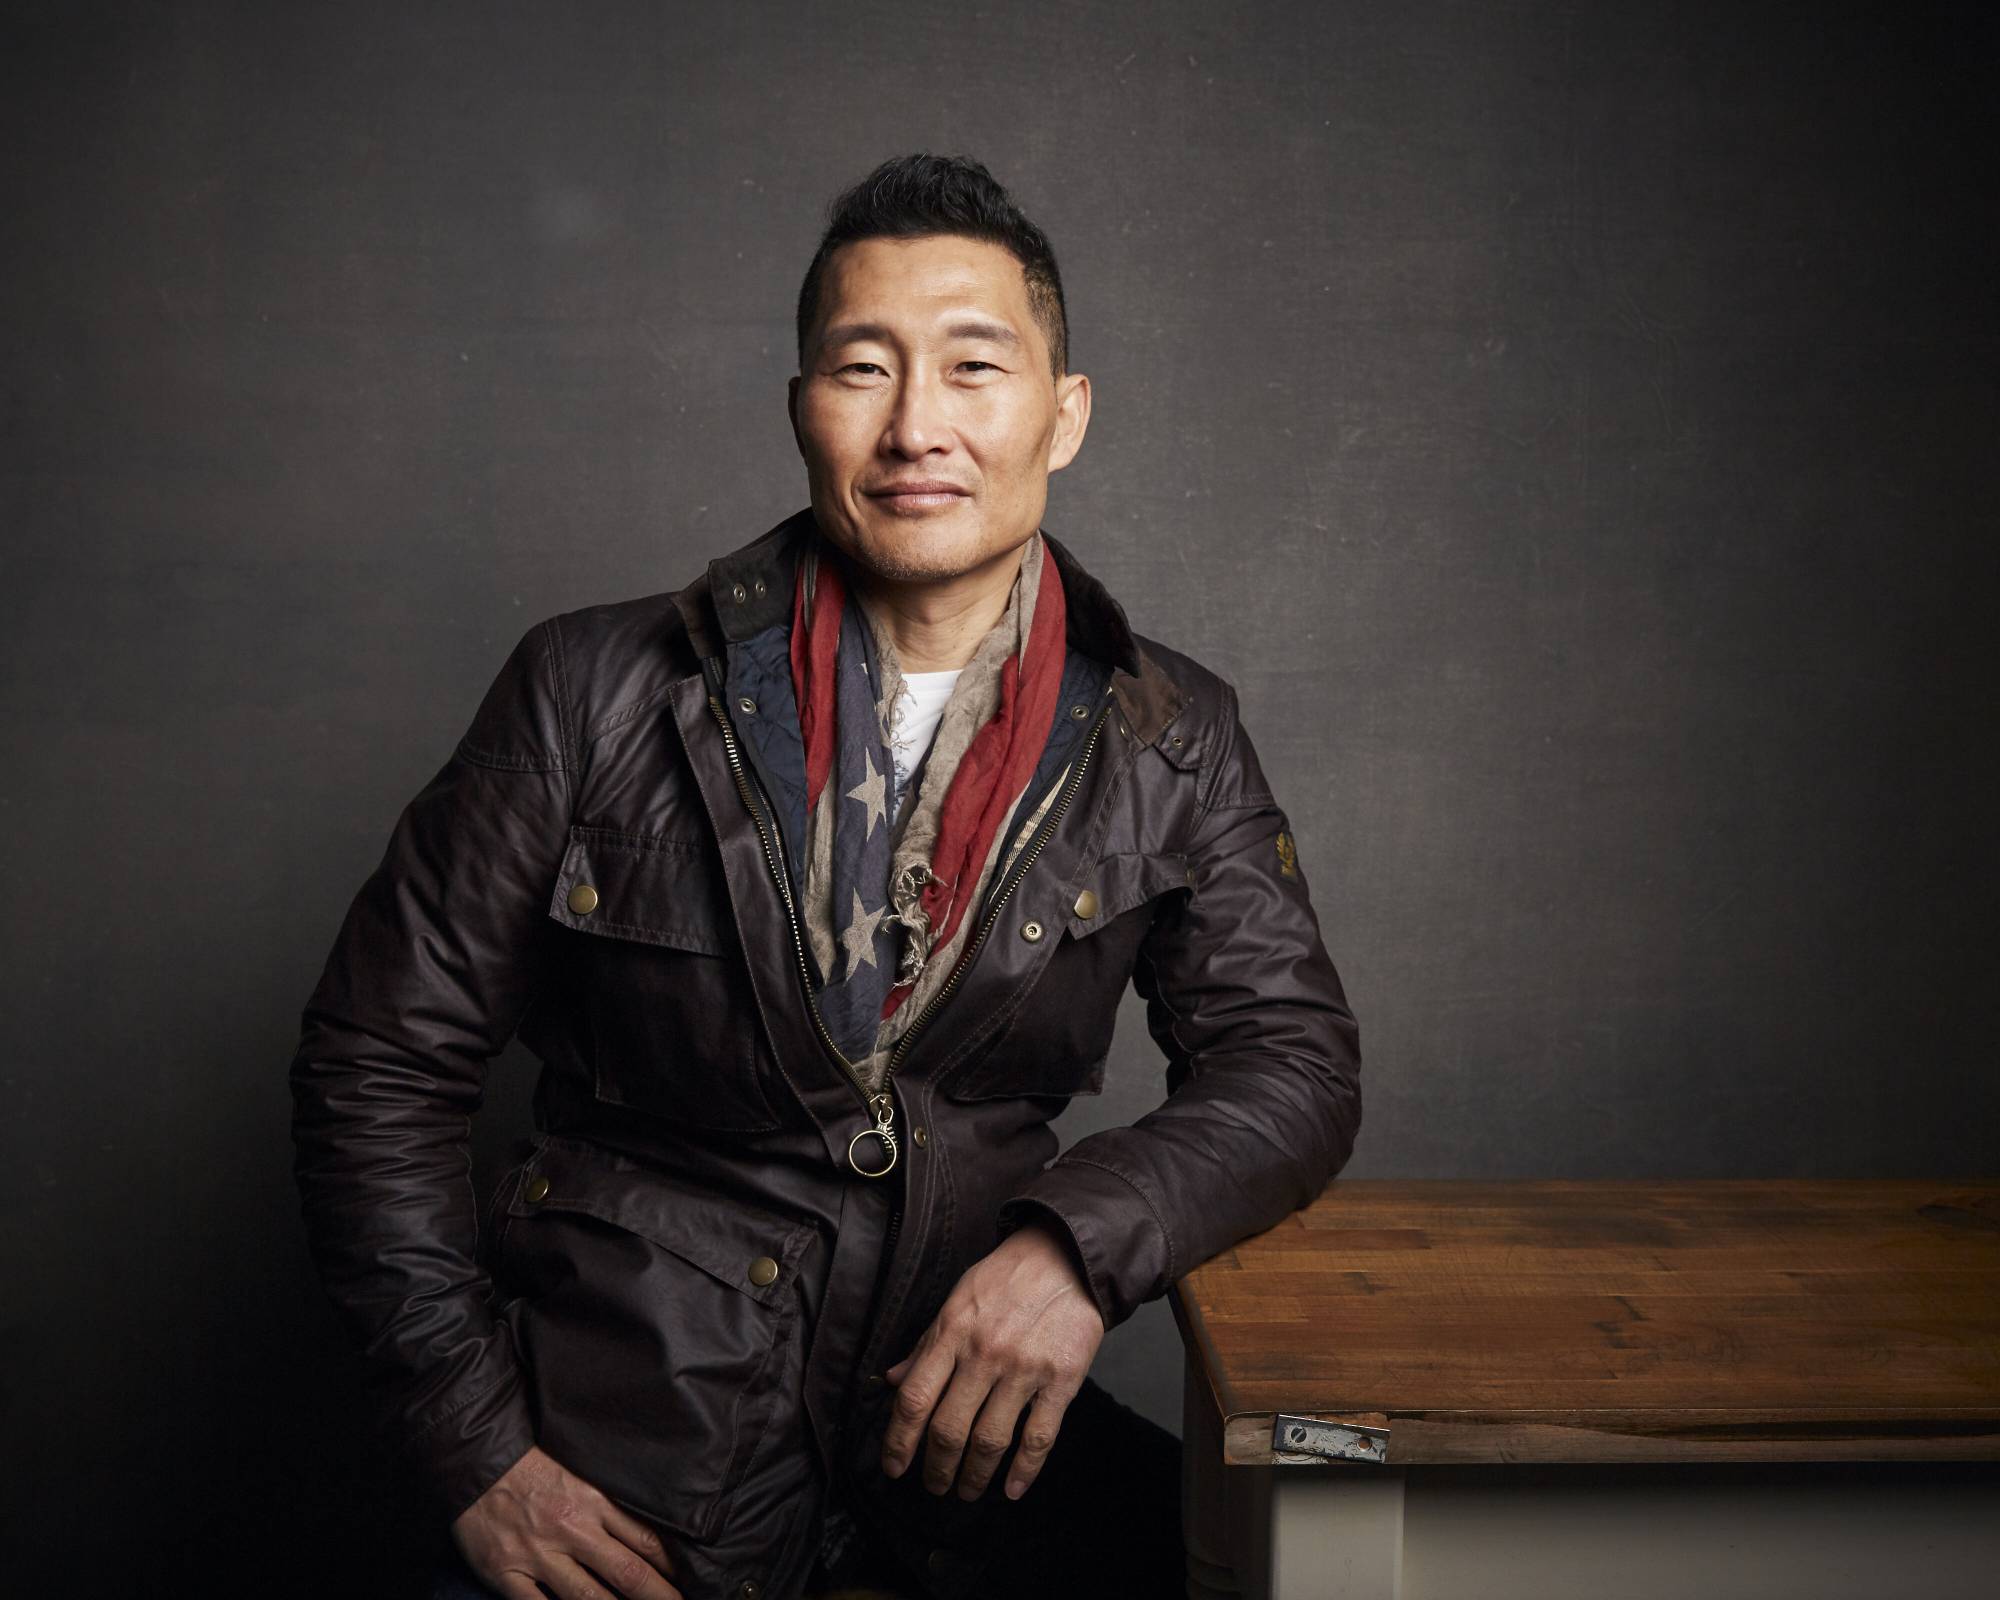 Korean-American actor Daniel Dae Kim faced racist trolling when he shared his COVID-19 diagnosis online in March. Hate crimes have surged against Asian Americans during the coronavirus crisis. | AP